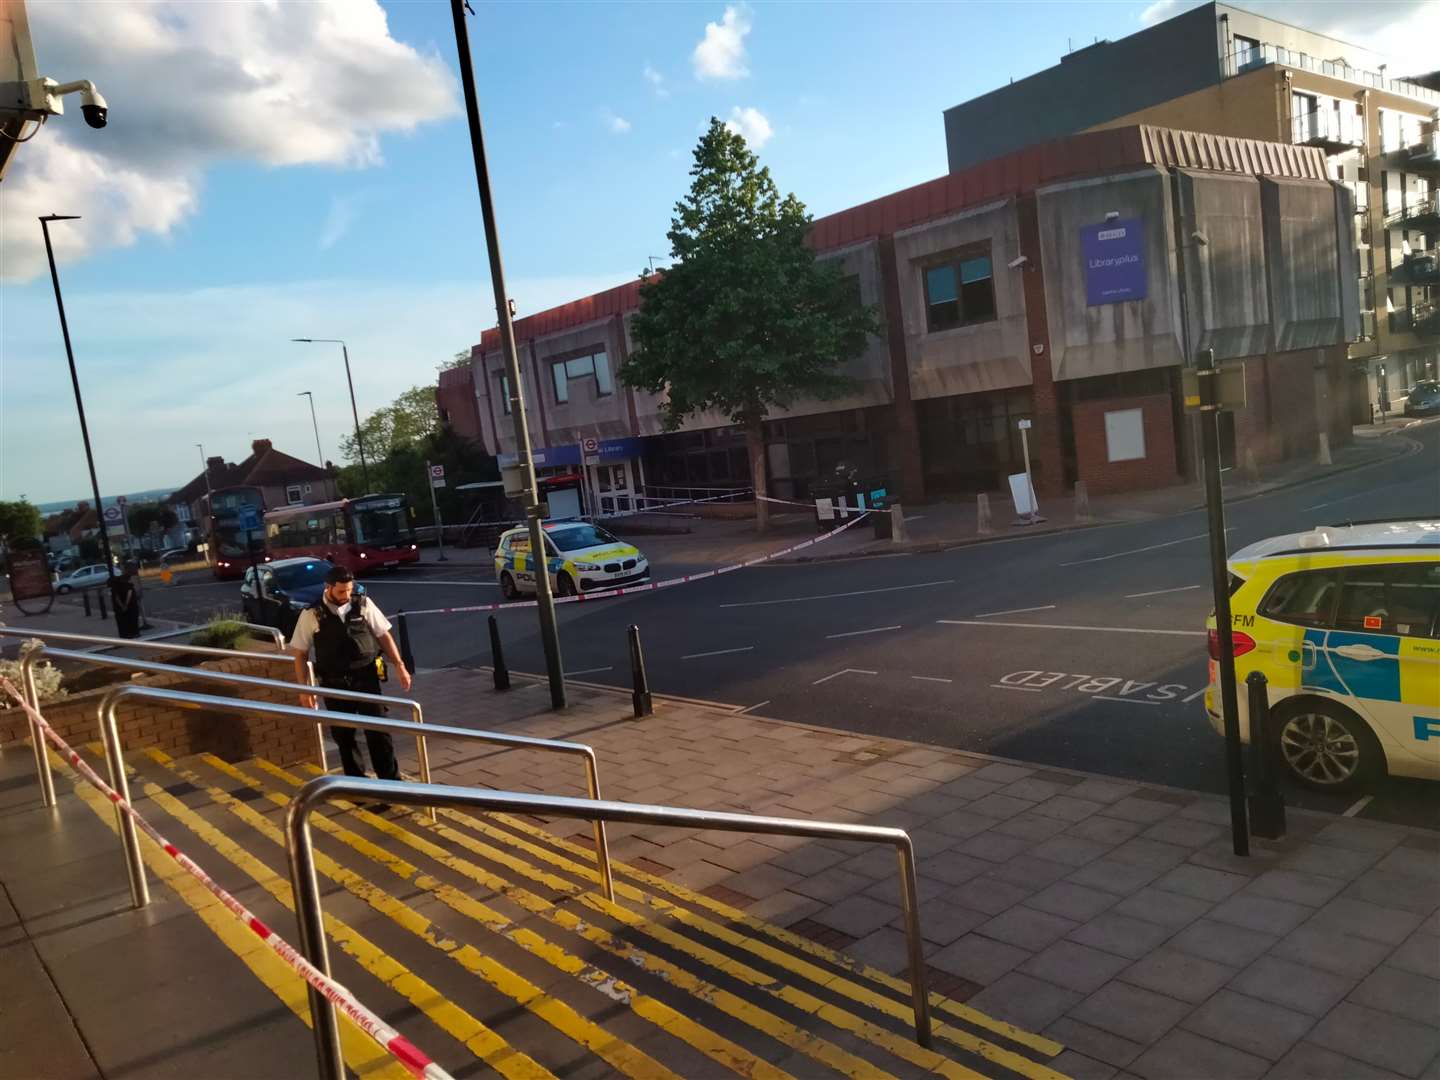 Police cordon off a stretch of road in Bexleyheath after a man was seen with slash wounds Picture: Sean Delaney